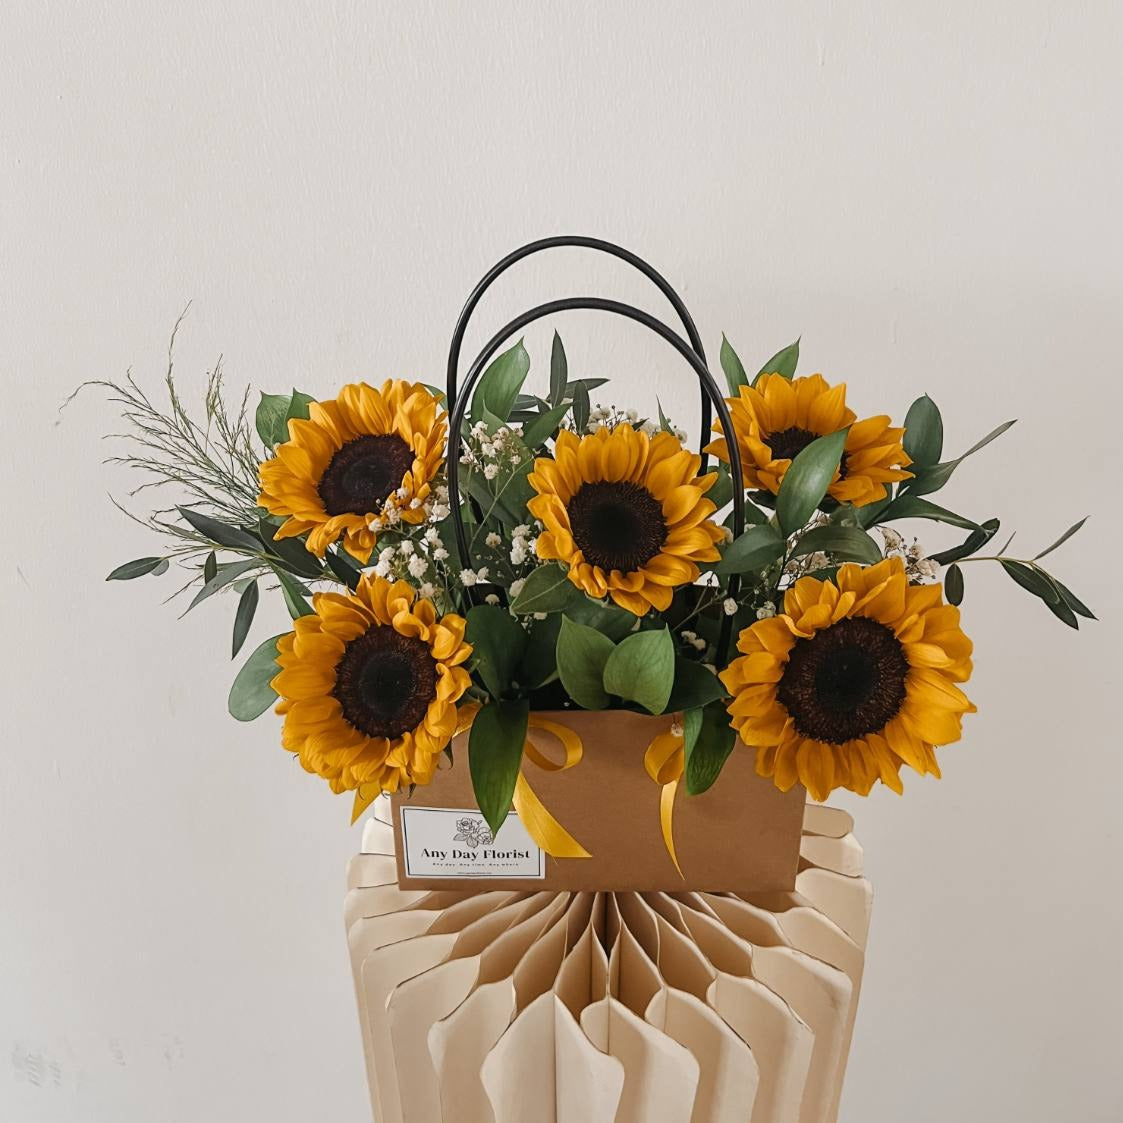 Any Day FloristThis is what i call a unique gift! 5 Sunflower for your love ones to wish them all the best in their next milestone!
*Please note that our selection of flowers may dAll Sunflower | Flower Bloom Bag